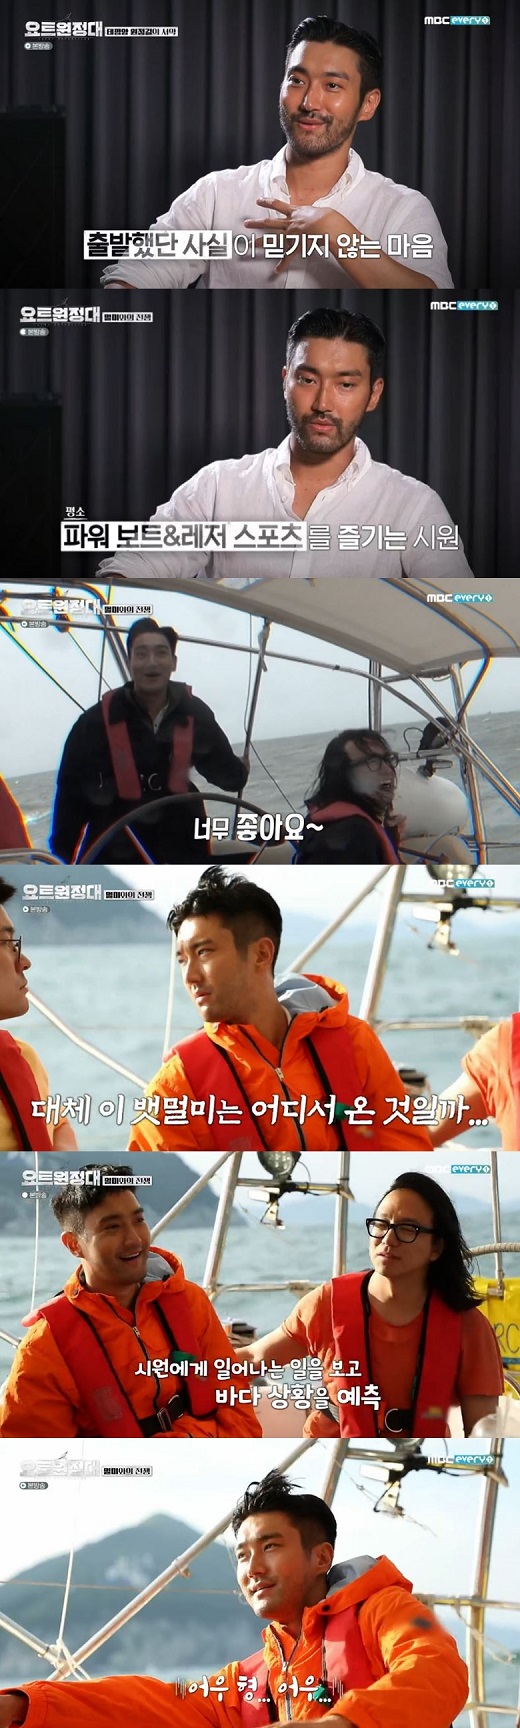 Singer and Actor Choi Siwon has complained of seasickness.On the afternoon of the 24th, cable channel MBC Everlon Yot Expedition finally depicted the Embarkation for Cythera in the Pacific Ocean Actor Jin Goo, Singer and Actor Choi Siwon, Singer Chang Kiha, and writer Song Ho-joon.The Embarkation for Cythera in Geoje Island left to find the Southern Cross.Song said, There was a sense of excitement, but I was determined to get strength.As the hull continued to shake, Positive King Choi Siwon also picked up the white flag, saying, I think Im here. He steals tears and says, I enjoyed a power boat and prefer leisure sports.I knew there would be really no seasickness - I did Nausea five times, he said.Unlike Choi Siwon, Jin Goo expressed surprise at Chang Kiha, who was fine, saying, The period is like a superhuman.